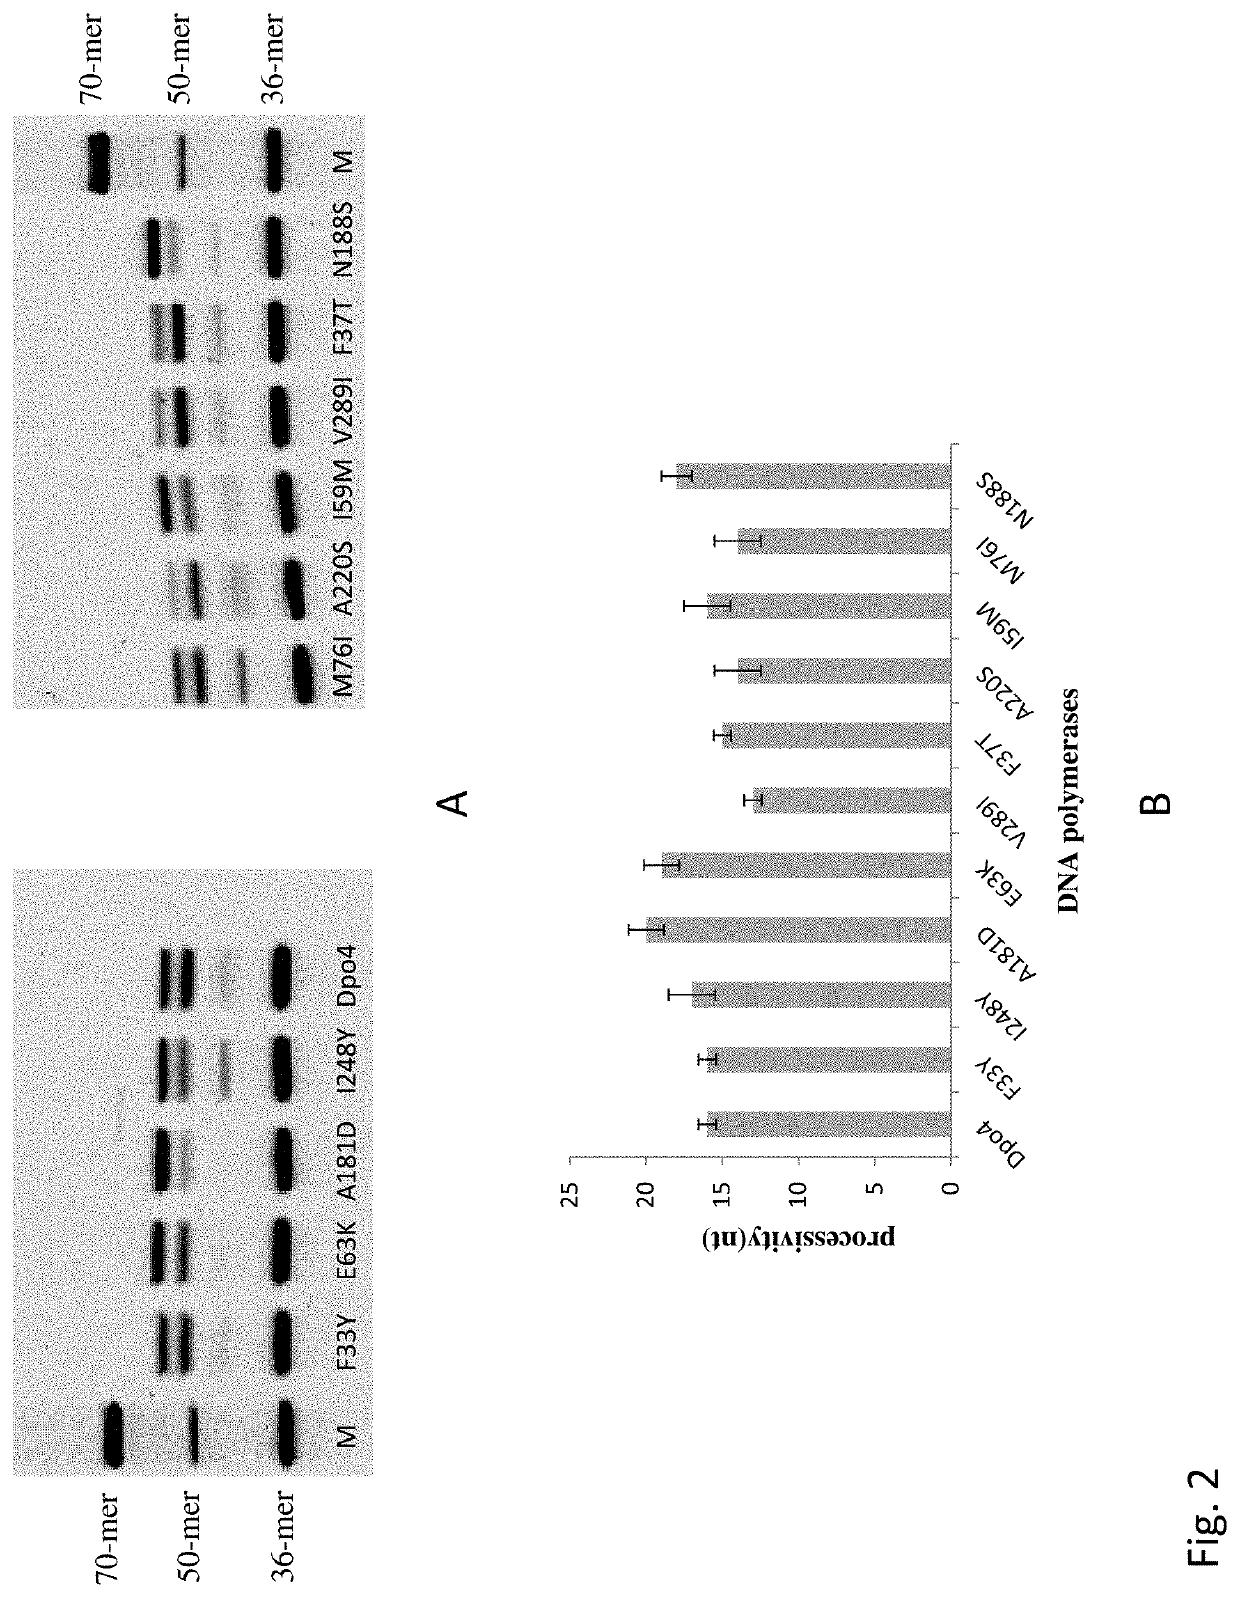 DNA polymerase mutants with increased processivity of DNA synthesis